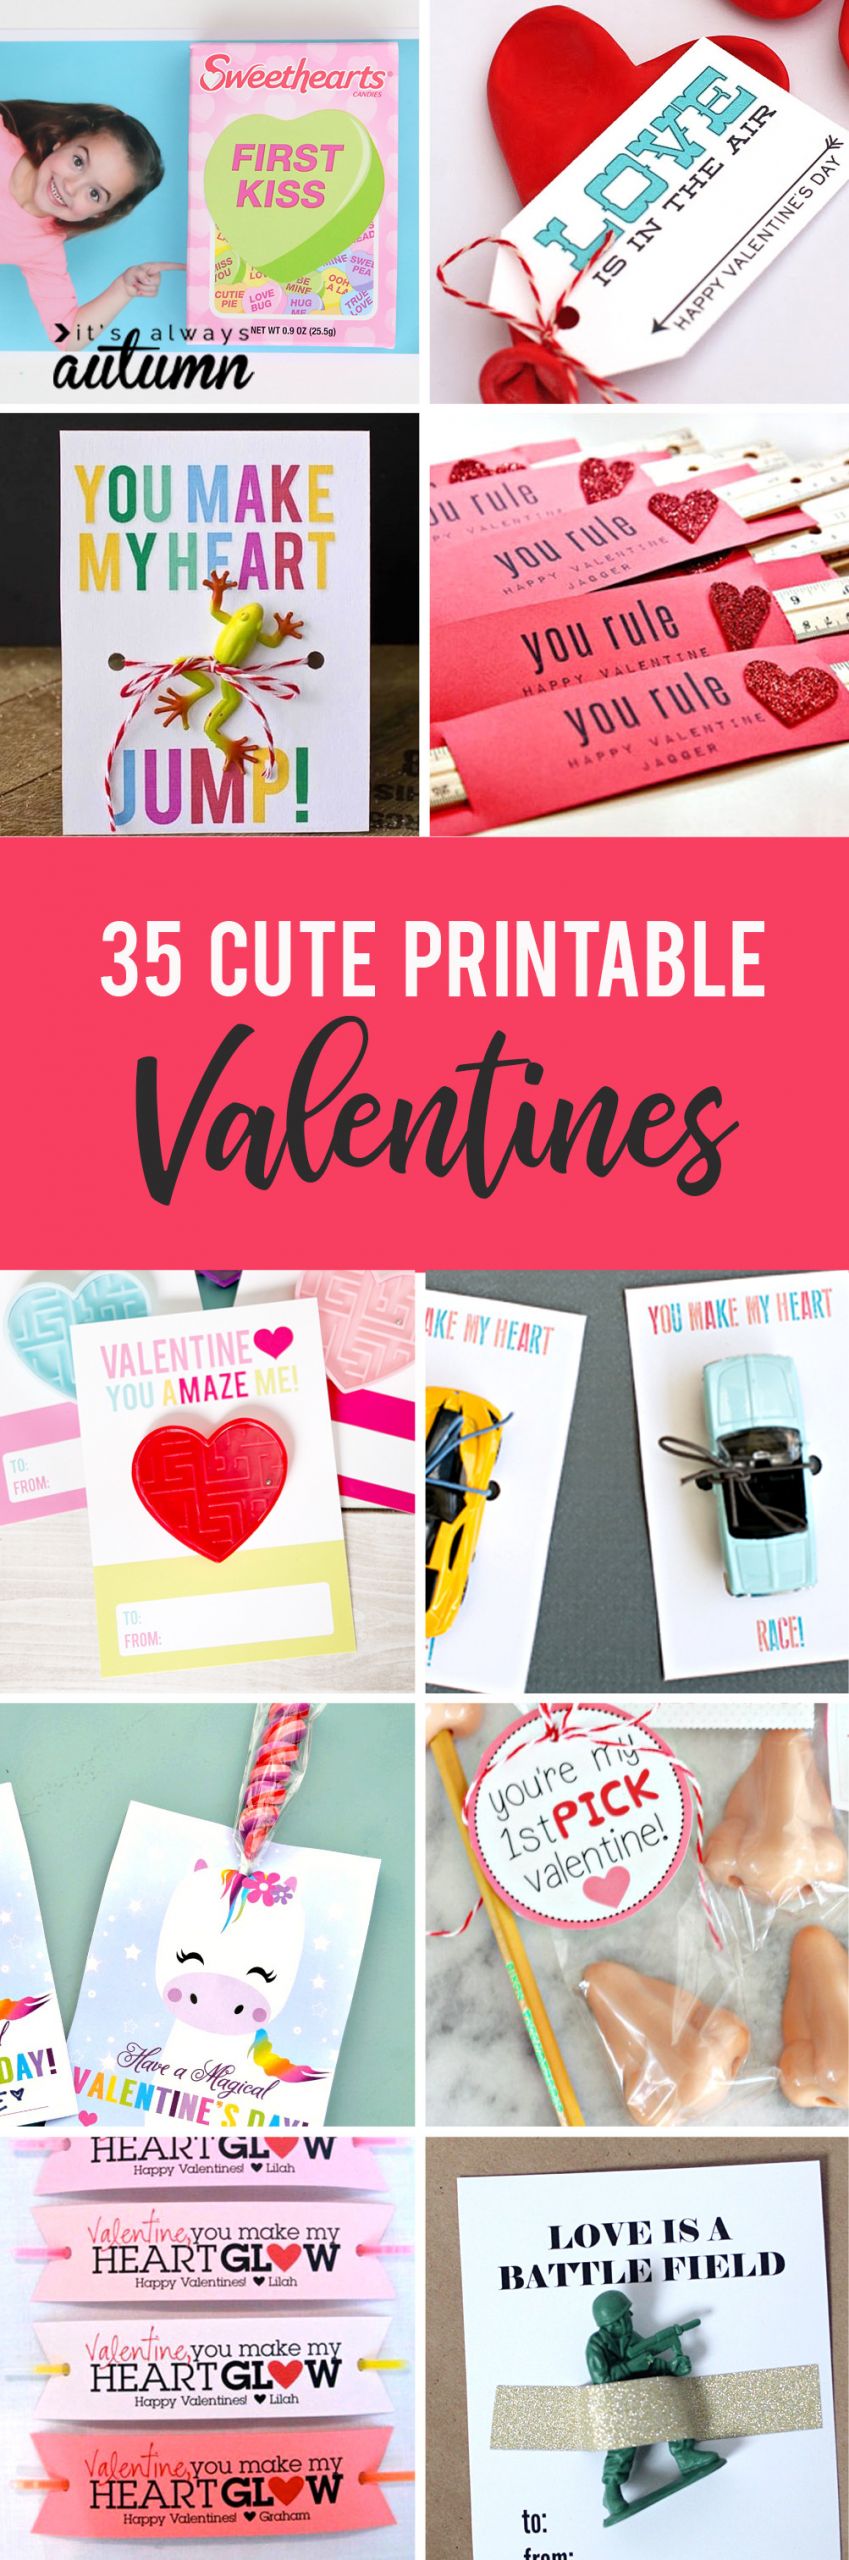 DIY Kids Valentine Cards
 35 Adorable DIY Valentines cards for kids that you can